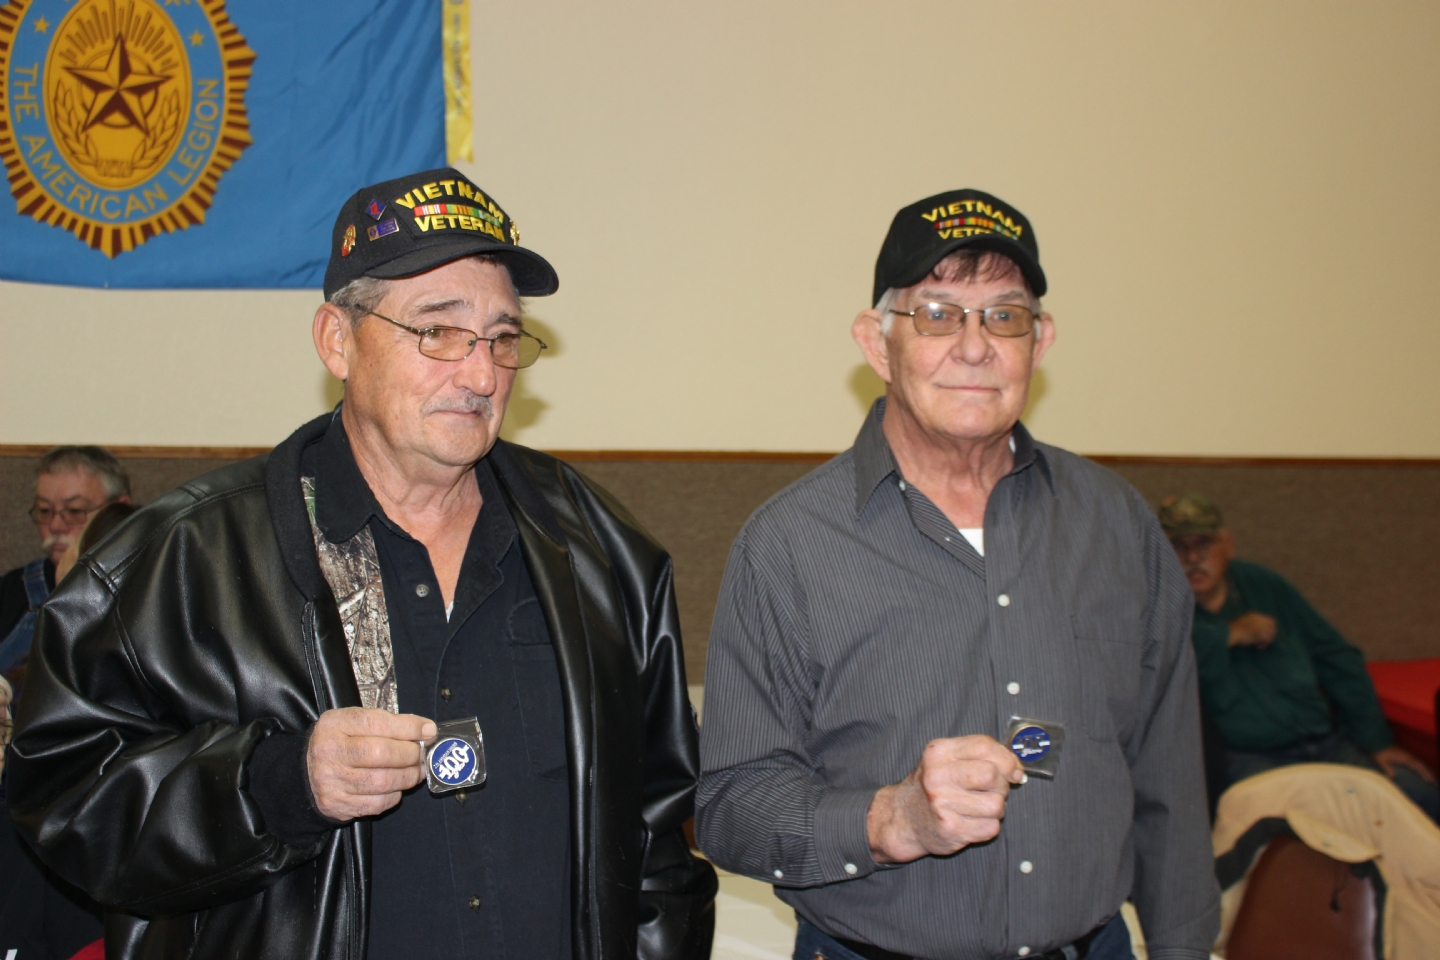 On Veteran's Day, November 11th 2018, the Benton American Legion Post 280 celebrated the American Legion Centennial. The highlight of this historic event was World War 2 Veteran, Carl Campanella, finally receiving the medals awarded him 73 years before.